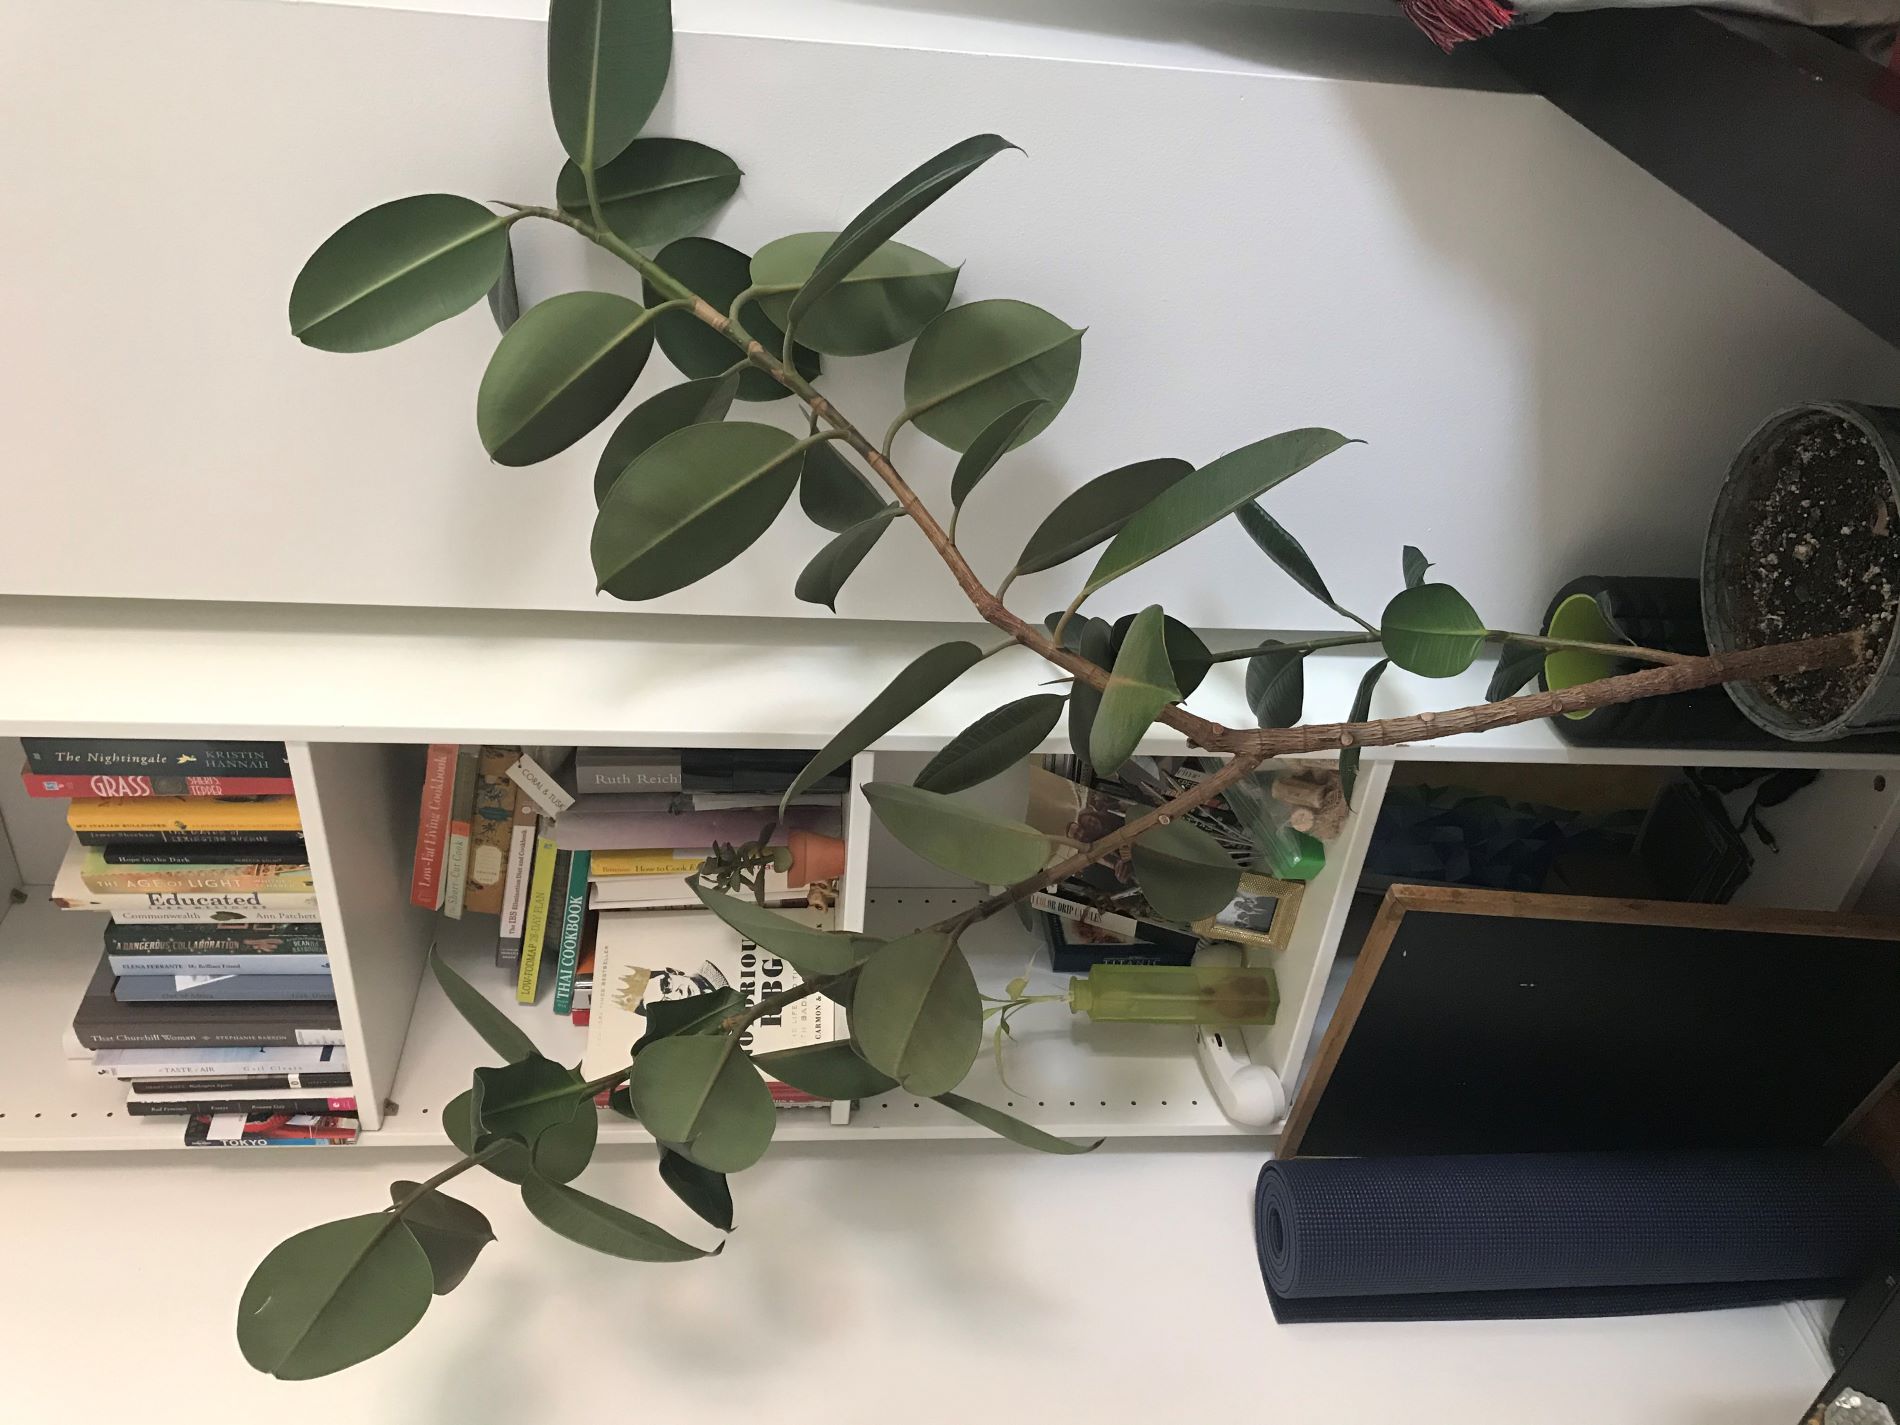 A tall, healthy rubber plant in an office